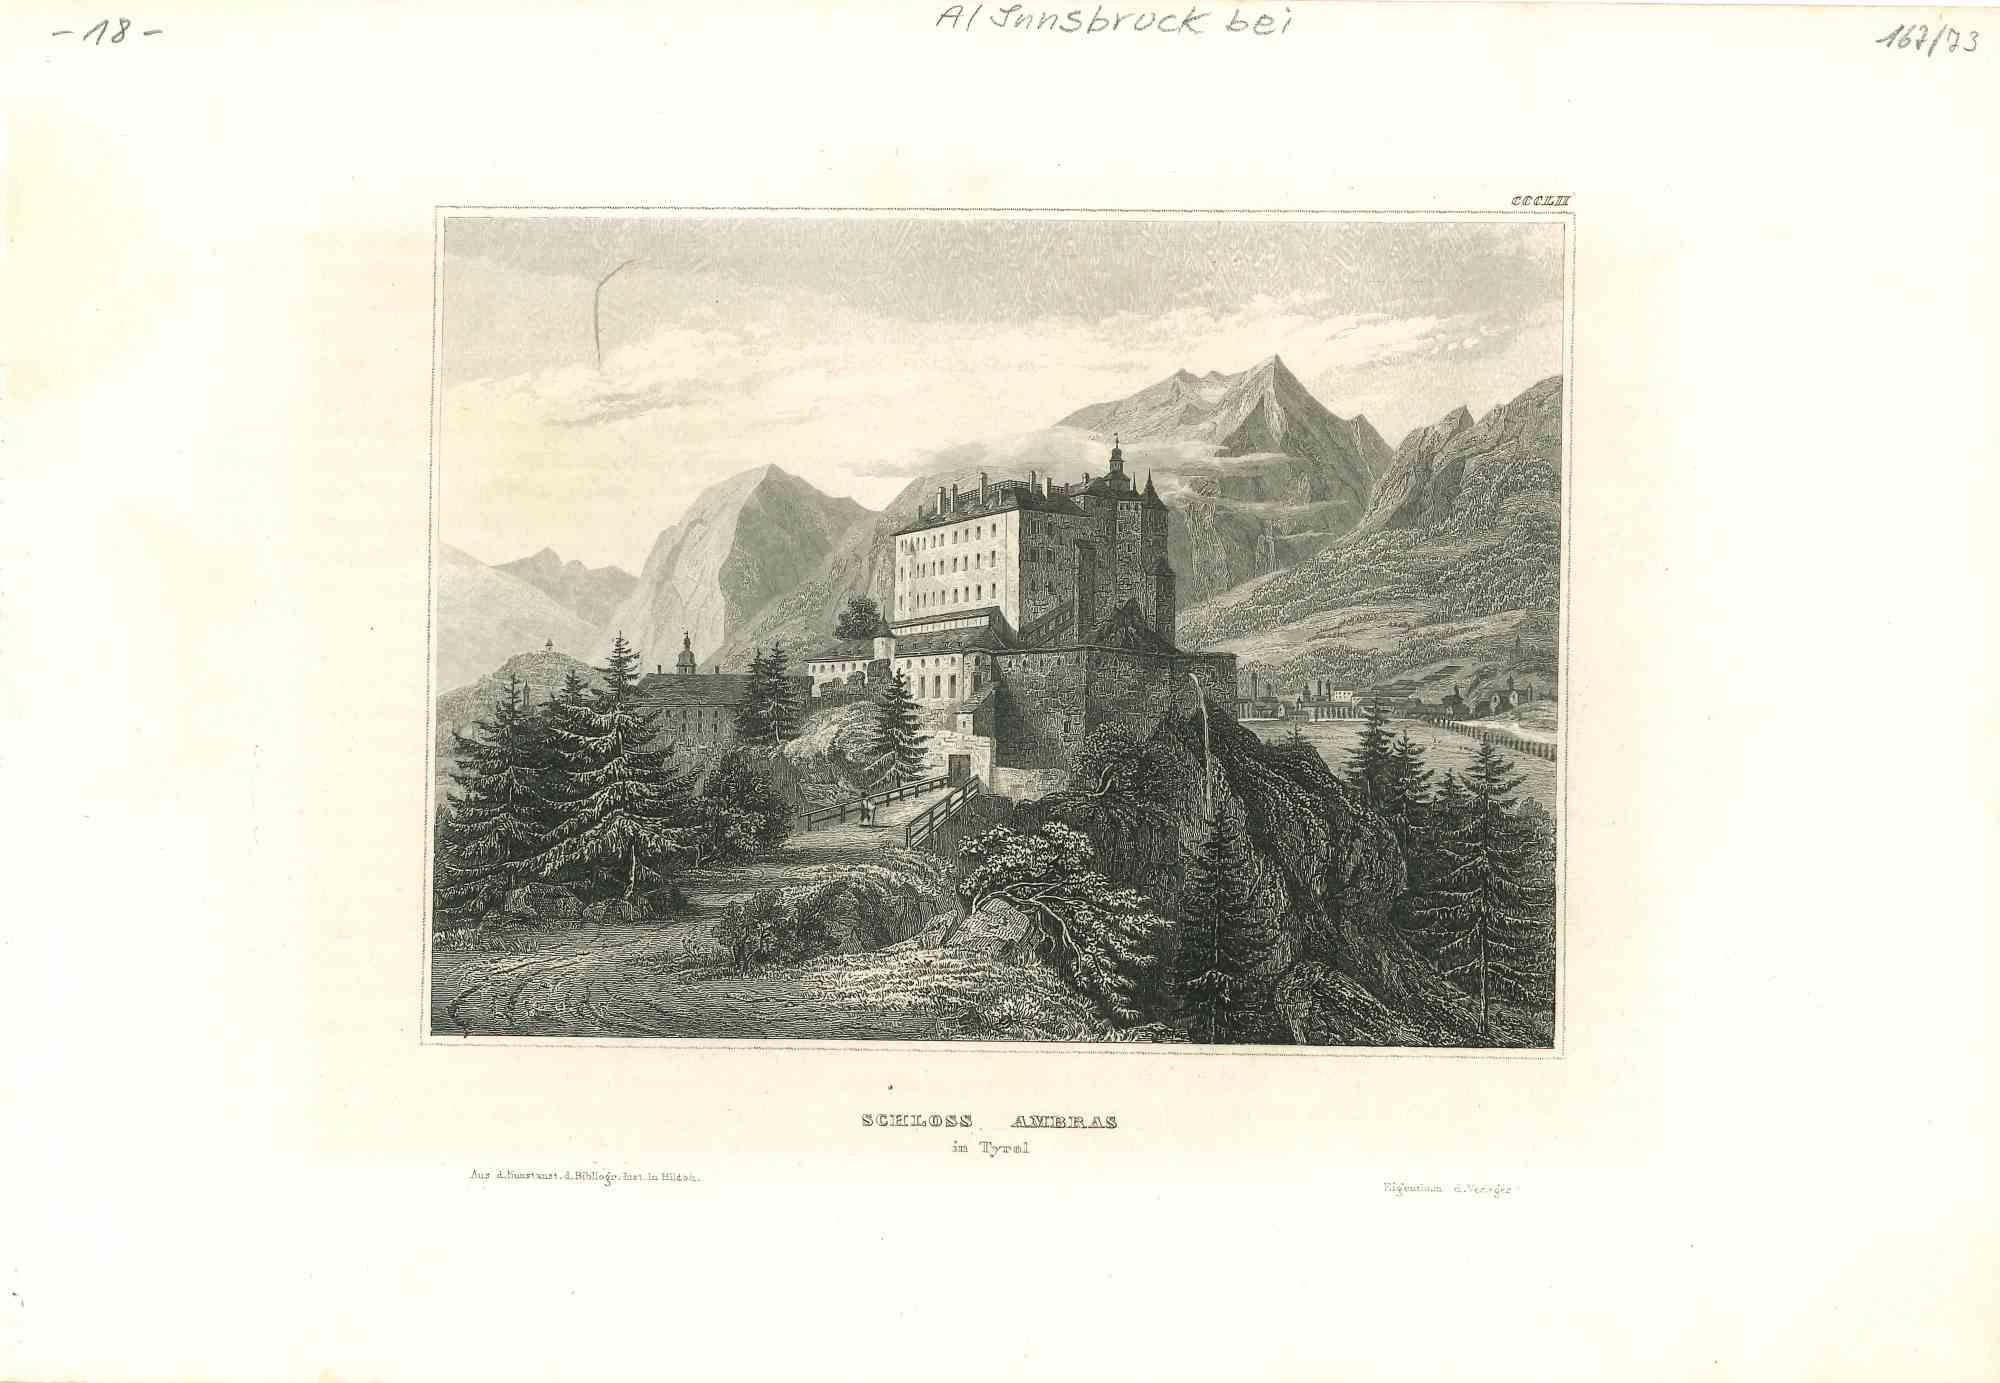 Unknown Figurative Print - Ancient View of Schloss Ambras - Original Lithograph - Mid-19th Century